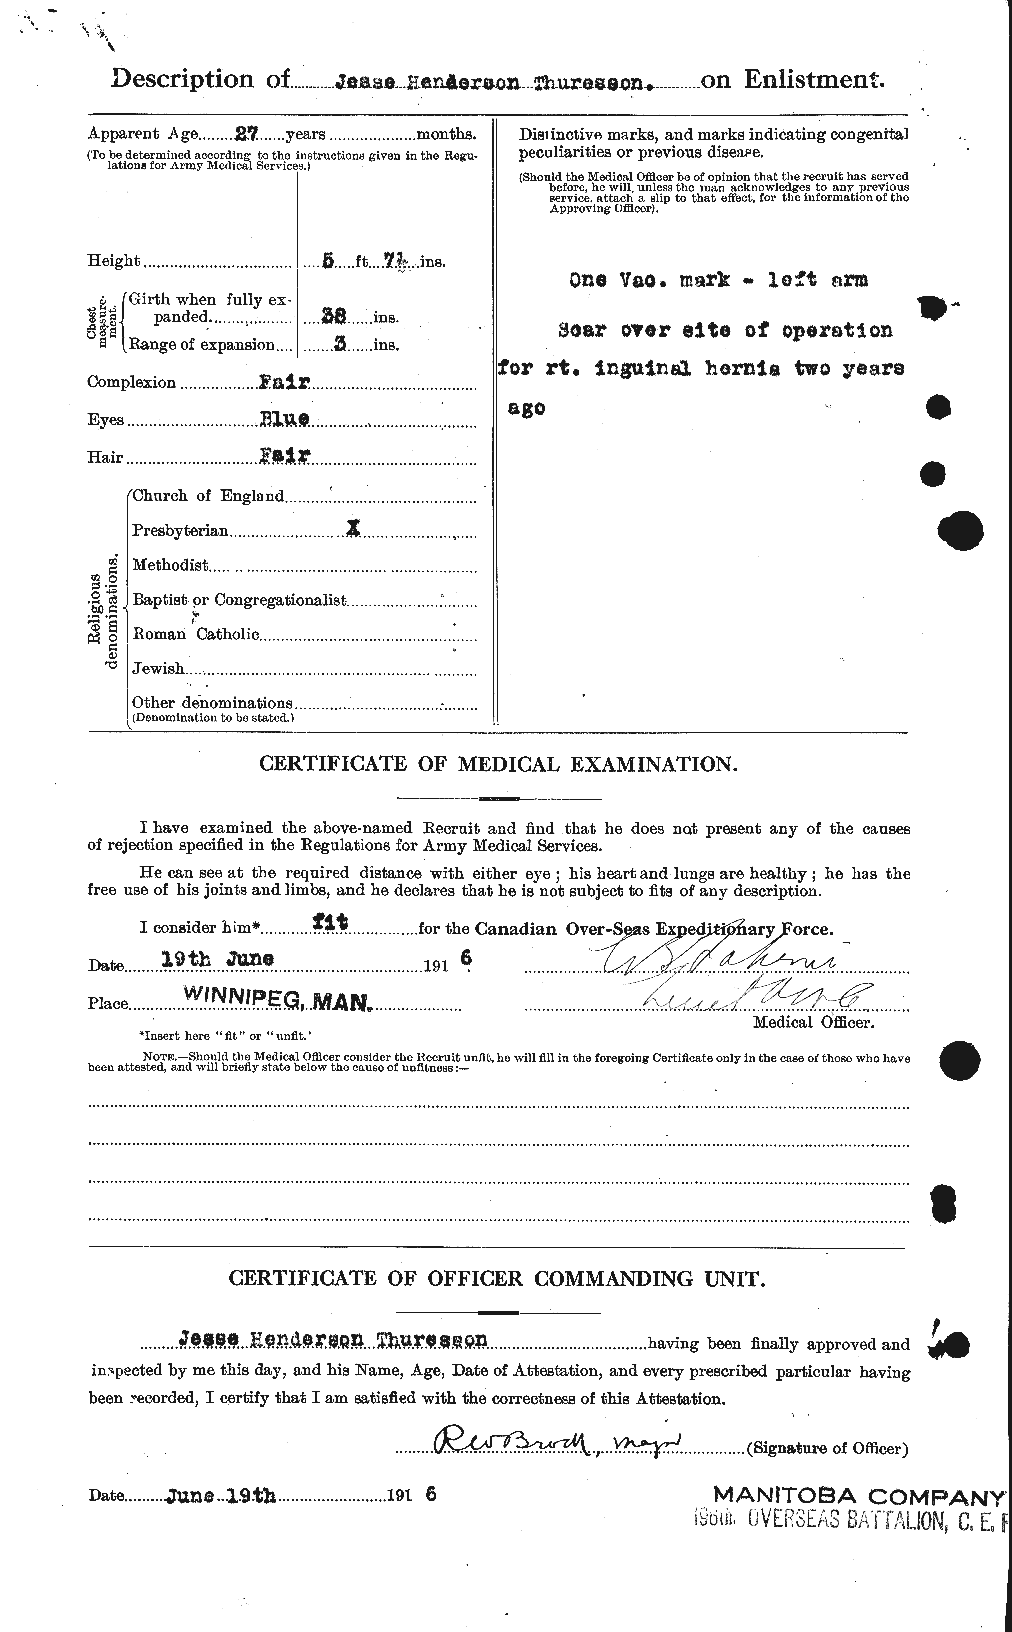 Personnel Records of the First World War - CEF 635215b